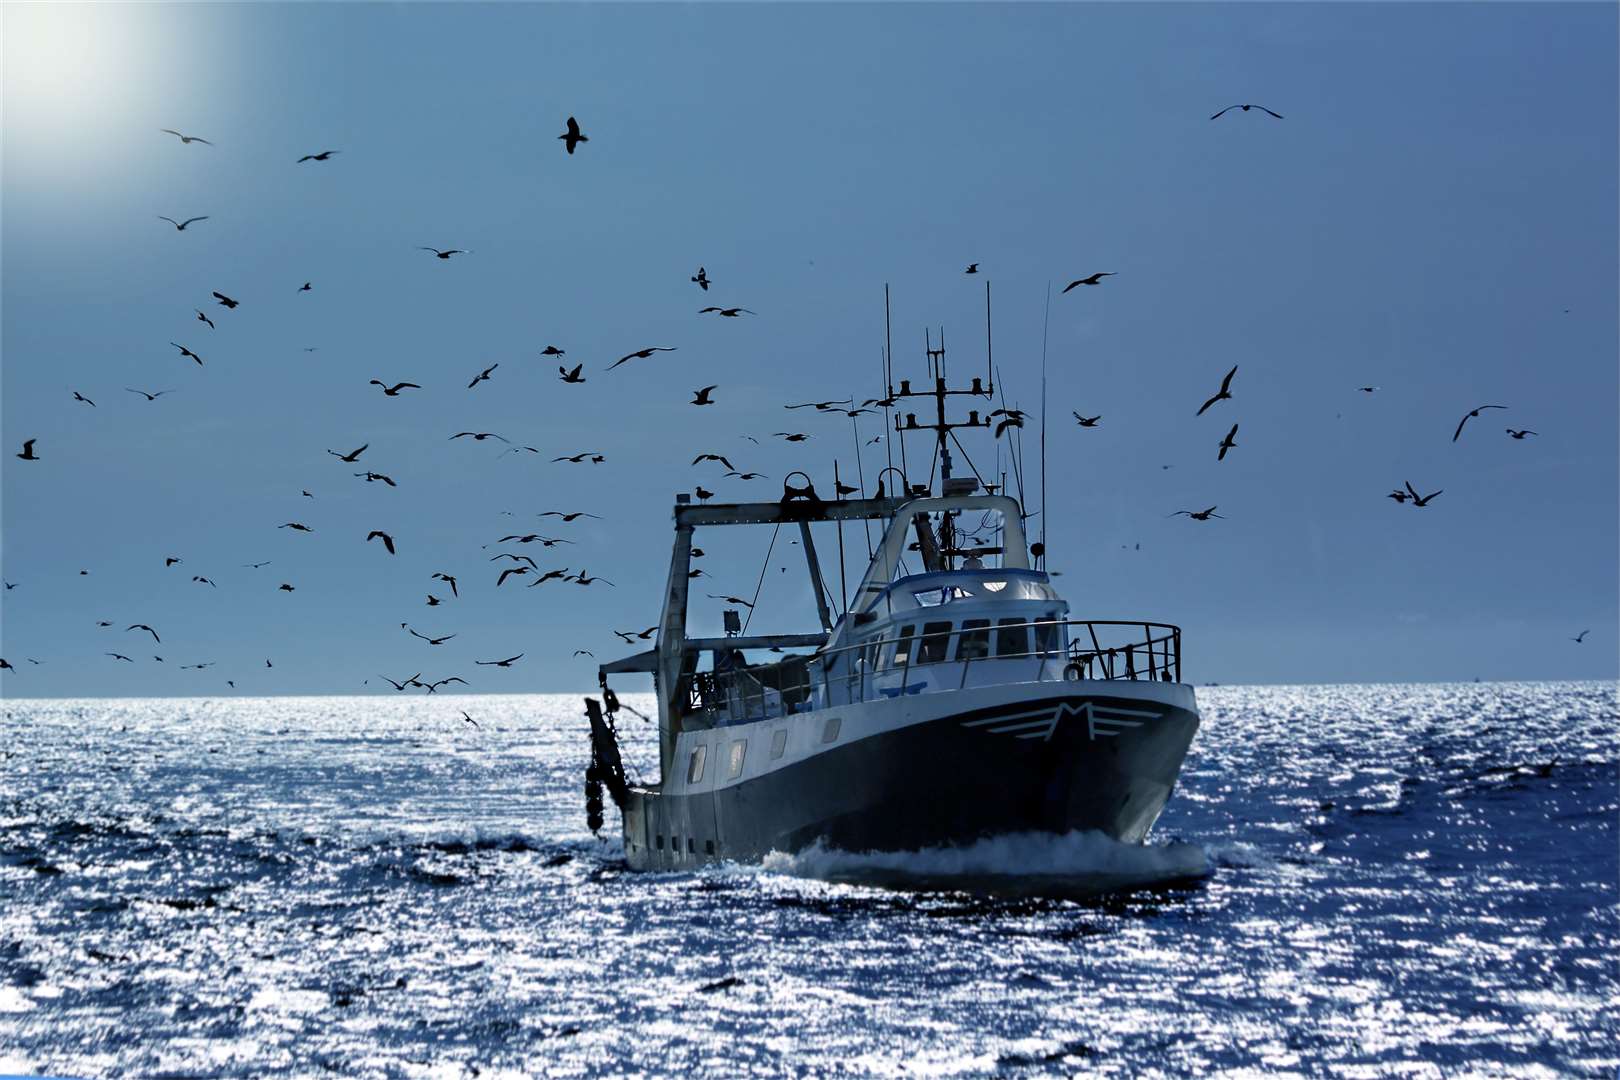 The new report says 56 per cent of Scottish waters could be closed to the fishing fleet by mid-century if the industry continues to be 'marginalised'.